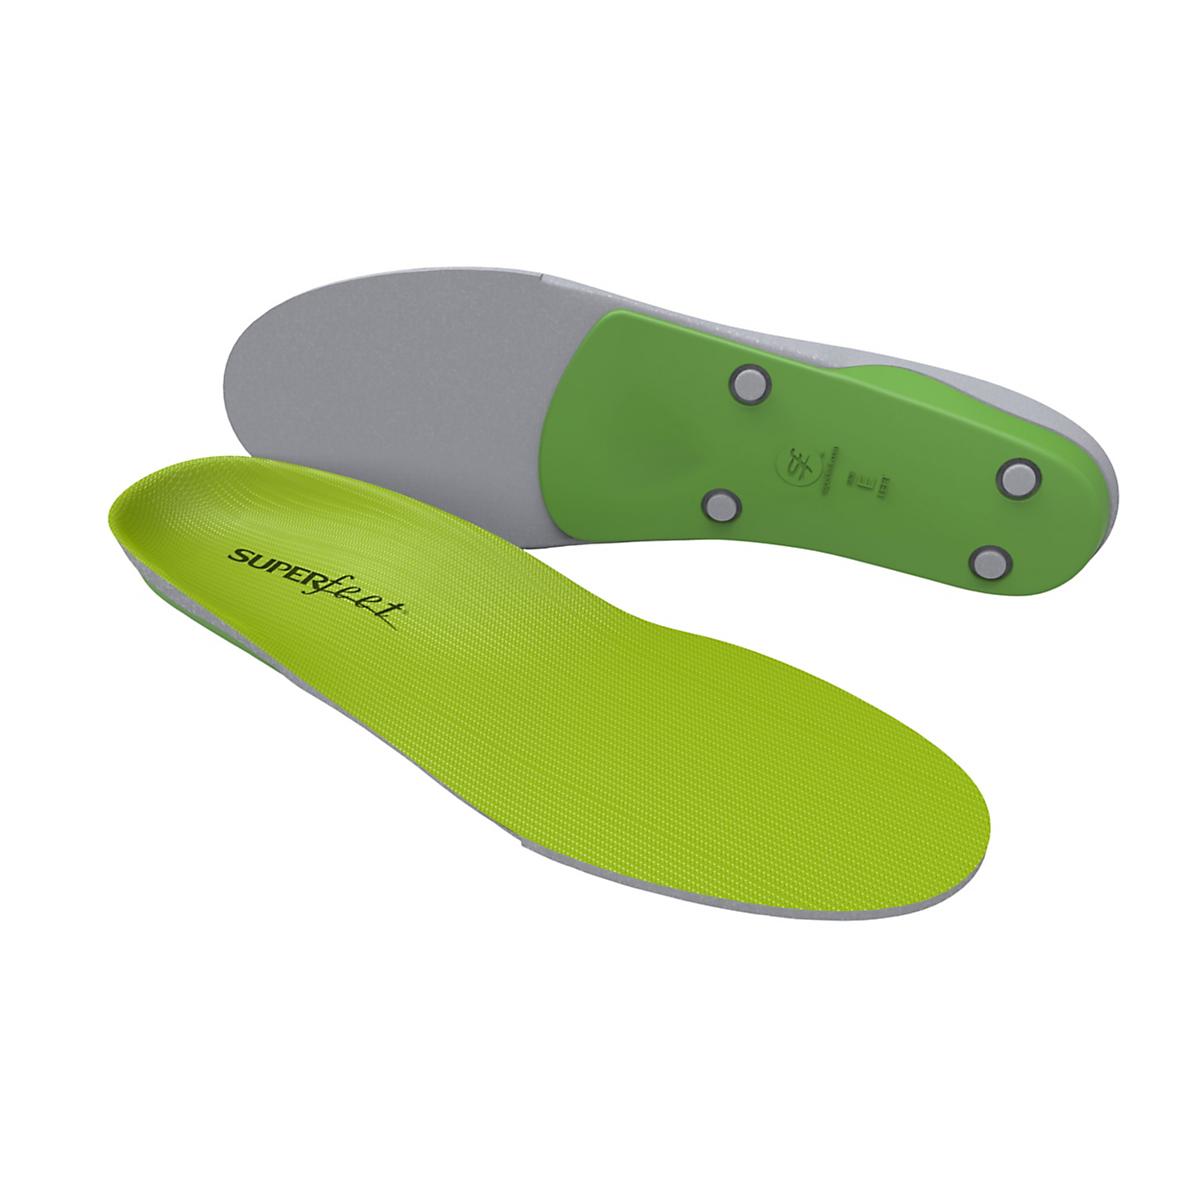 Superfeet Green Insoles at Road Runner Sports